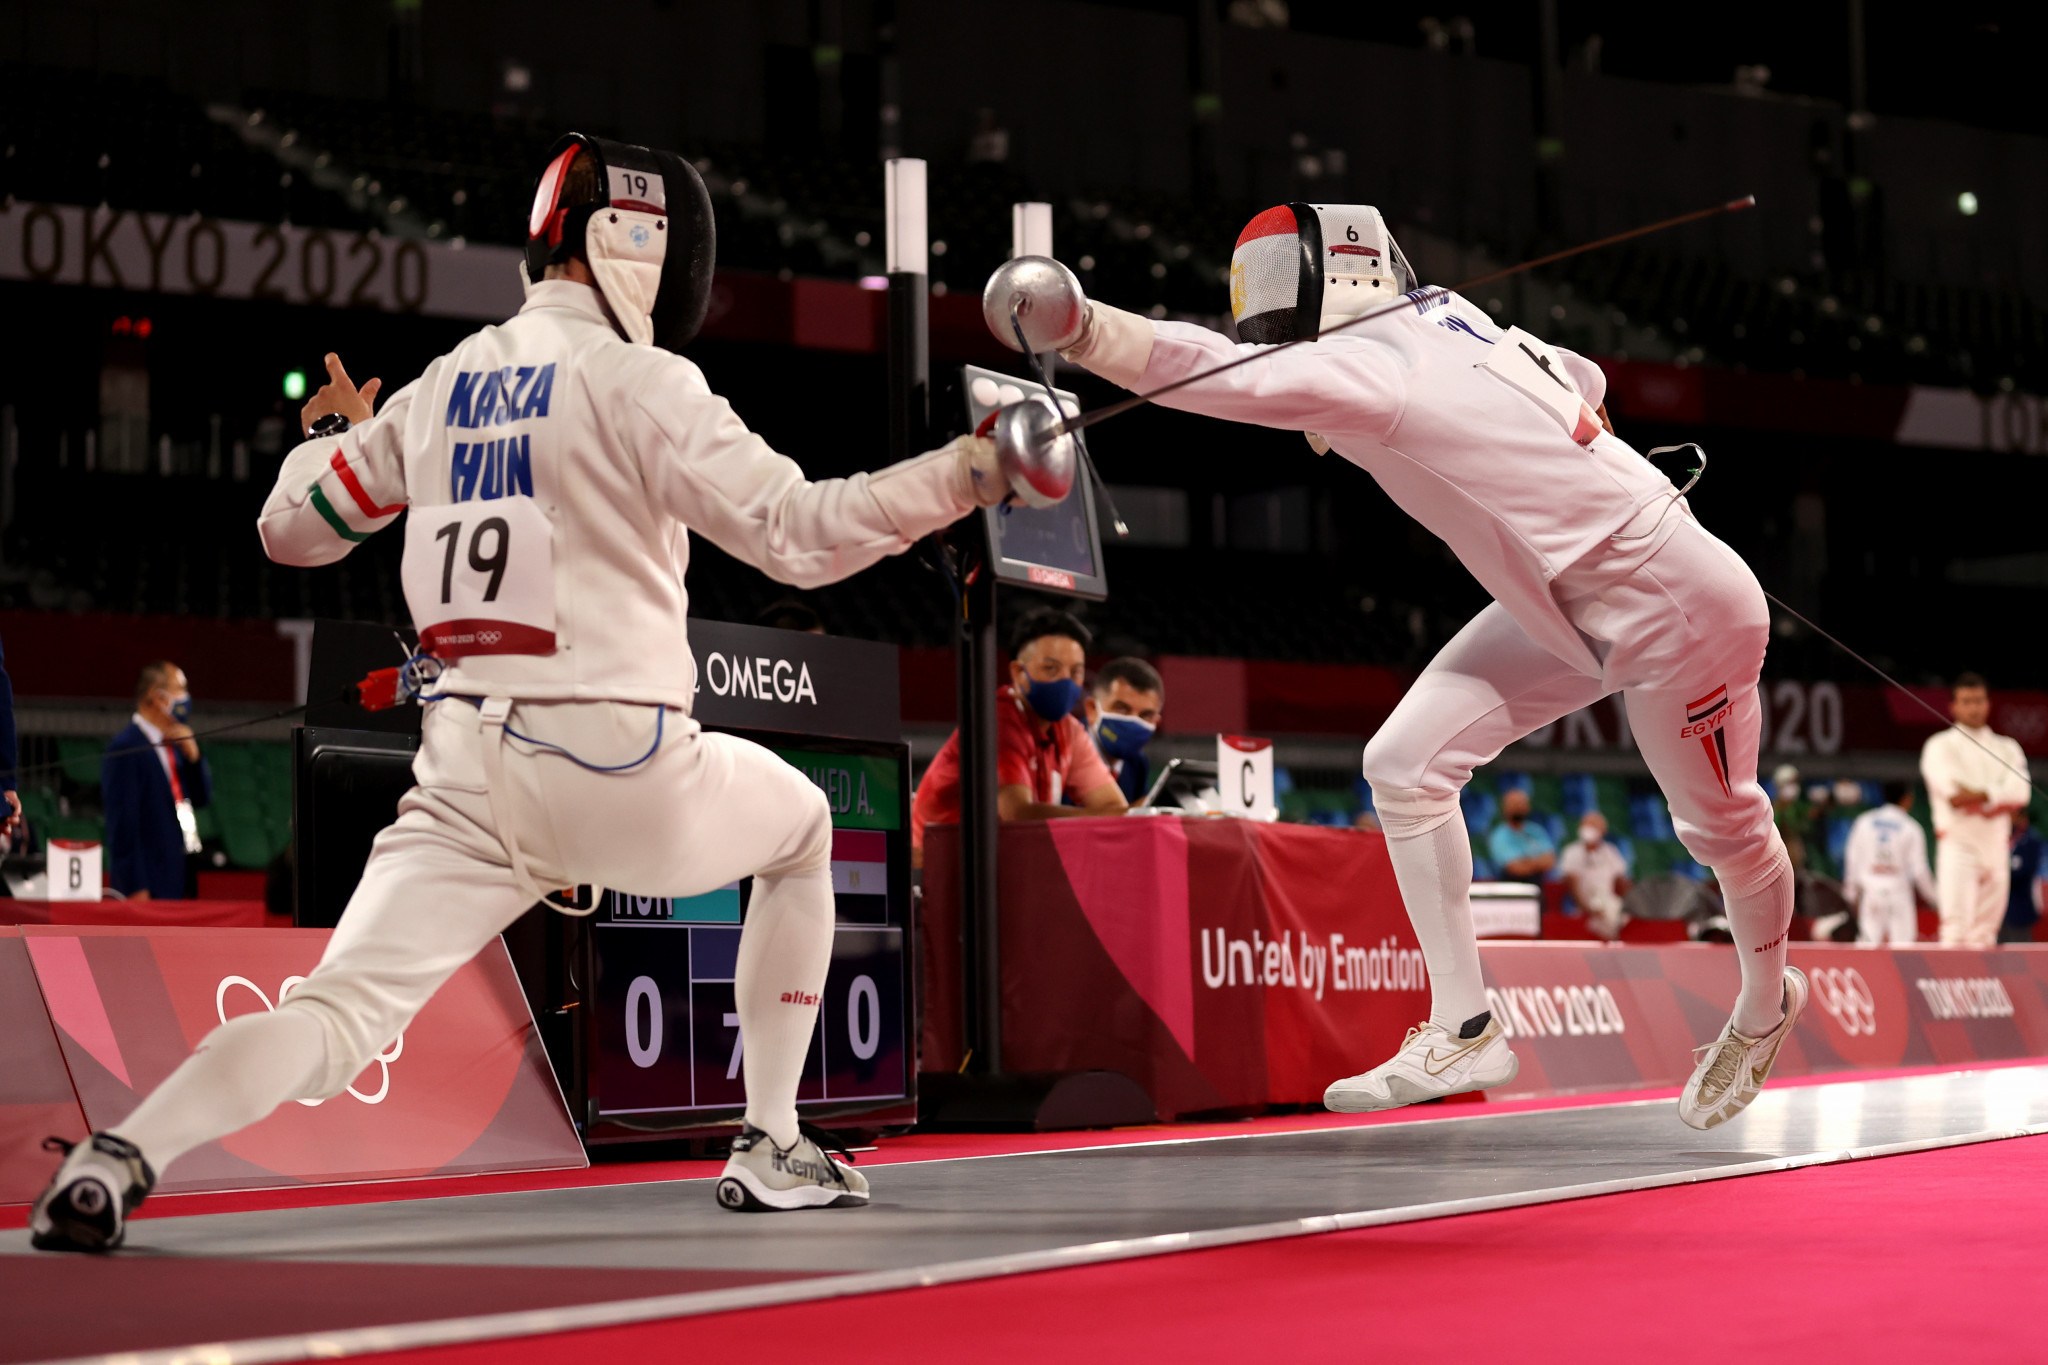 Modern pentathlon has been left off the initial sports programme for Los Angeles 2028 ©Getty Images